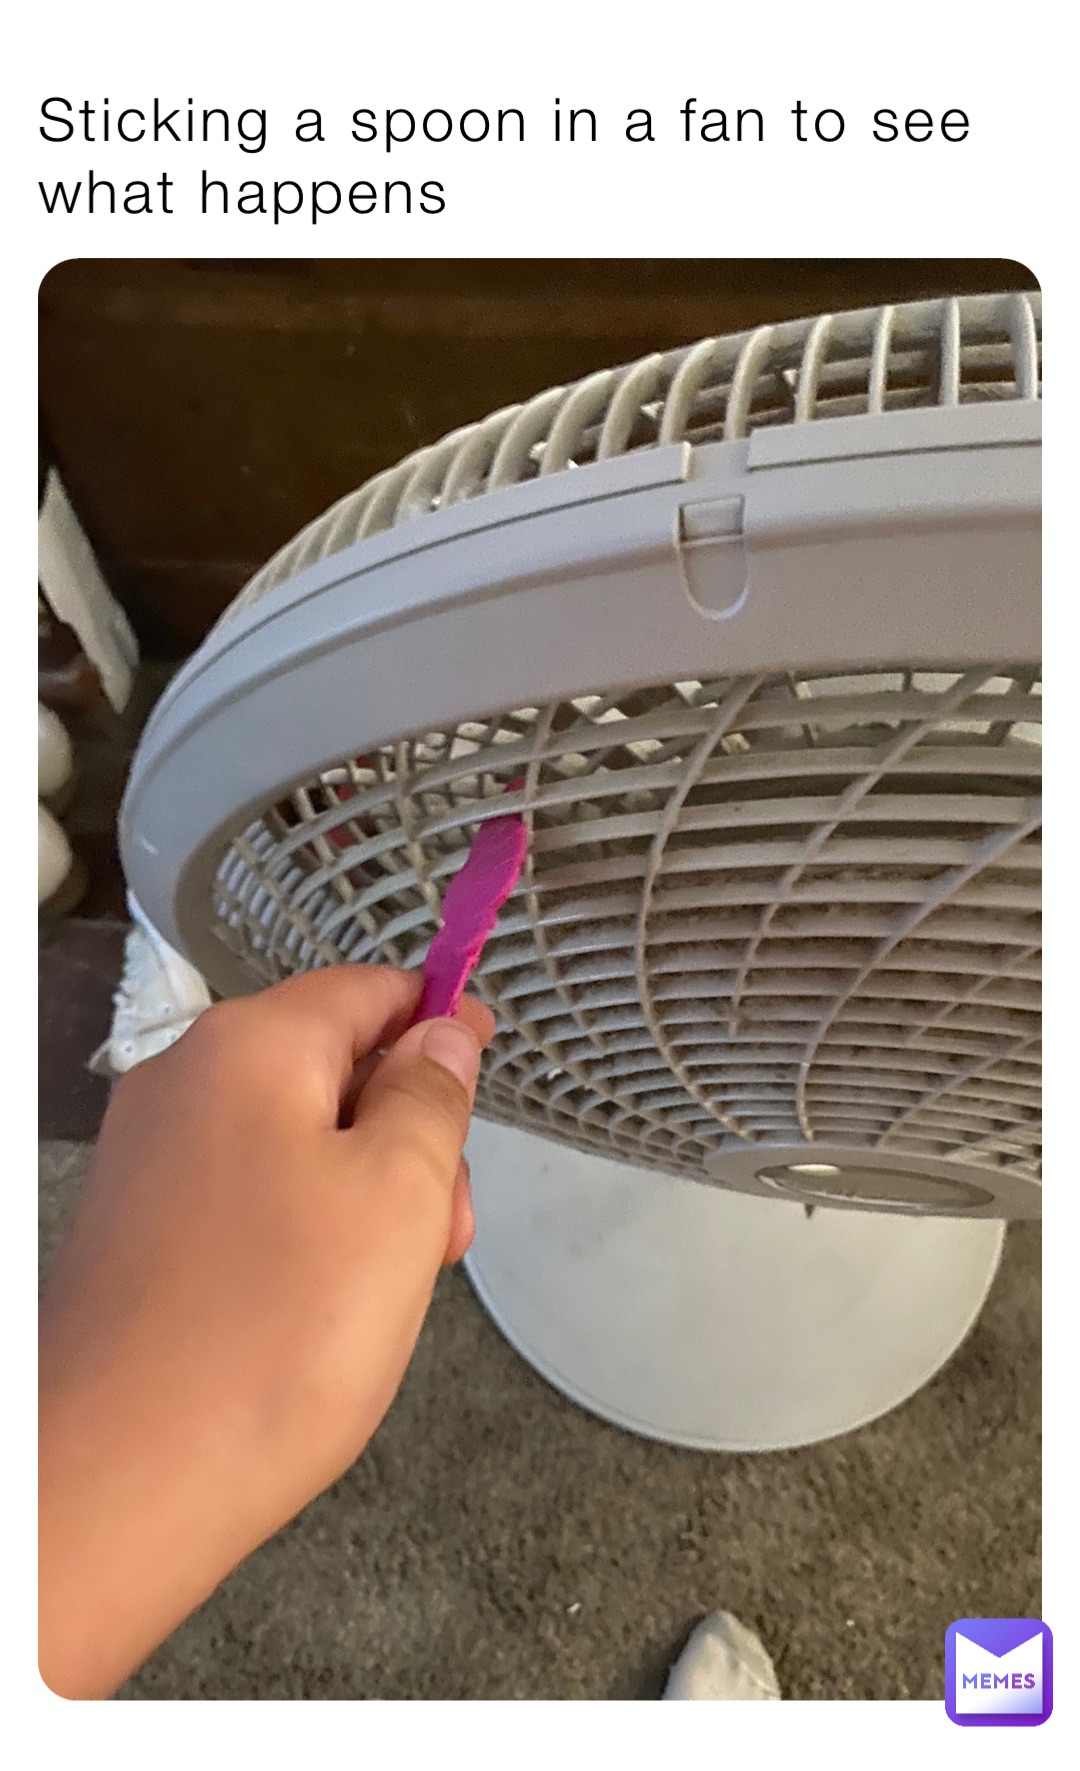 Sticking a spoon in a fan to see what happens